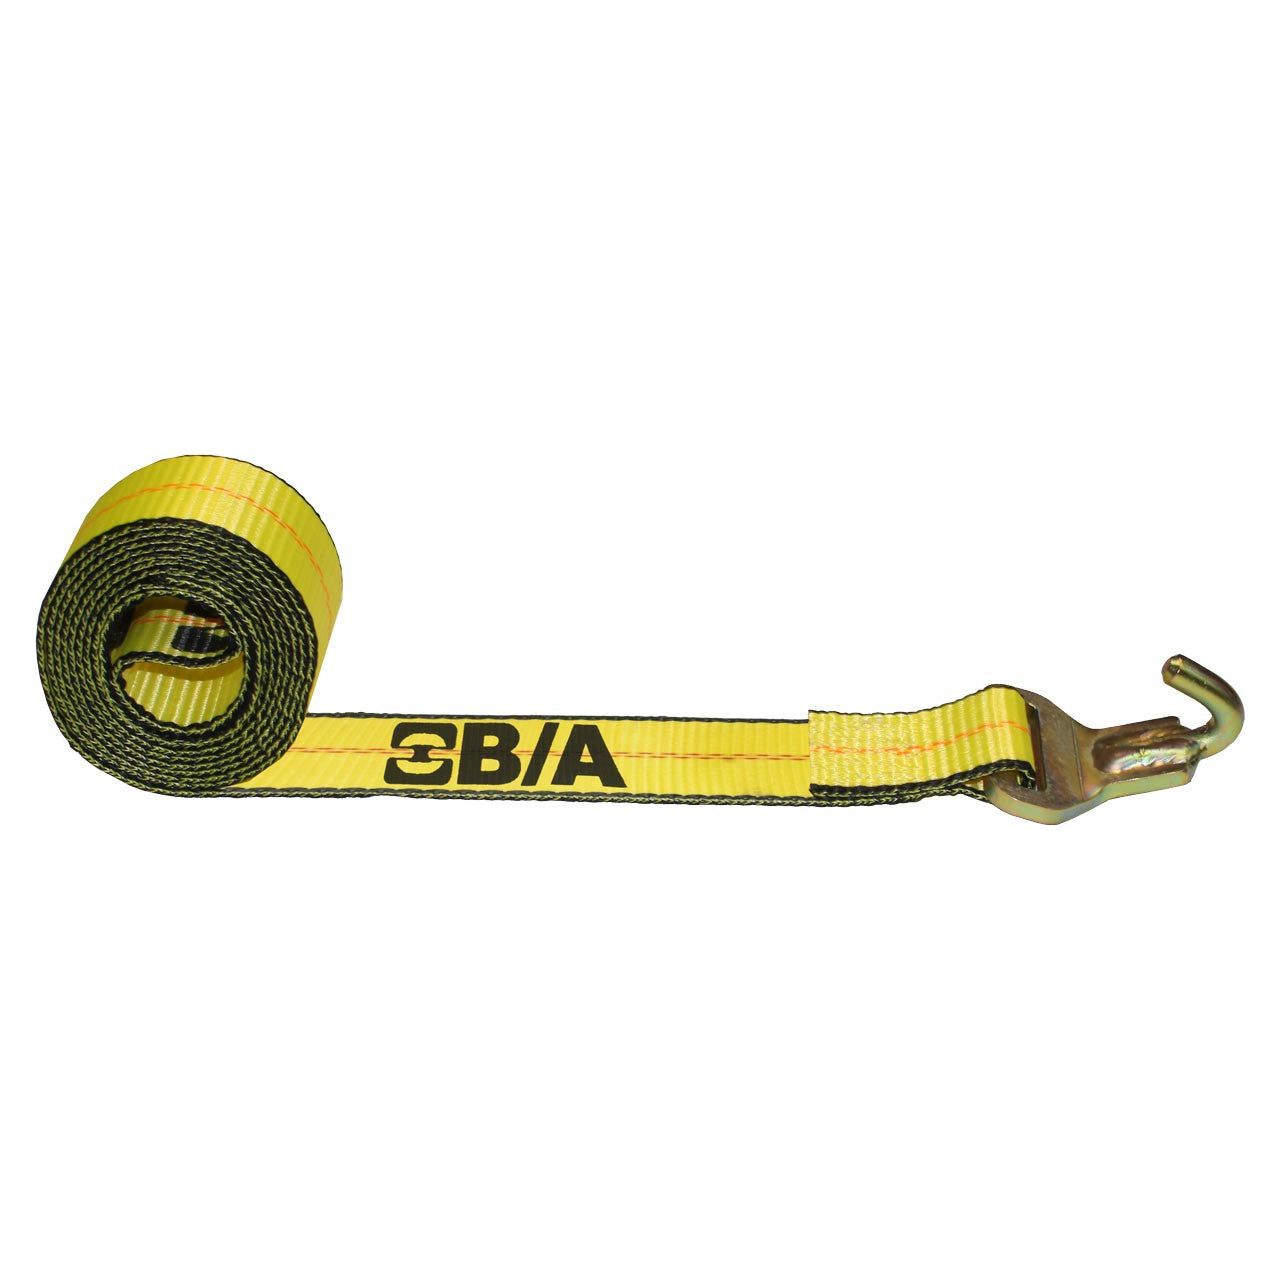 B/A Products 2" x 8' Old Style Quick Pick Strap